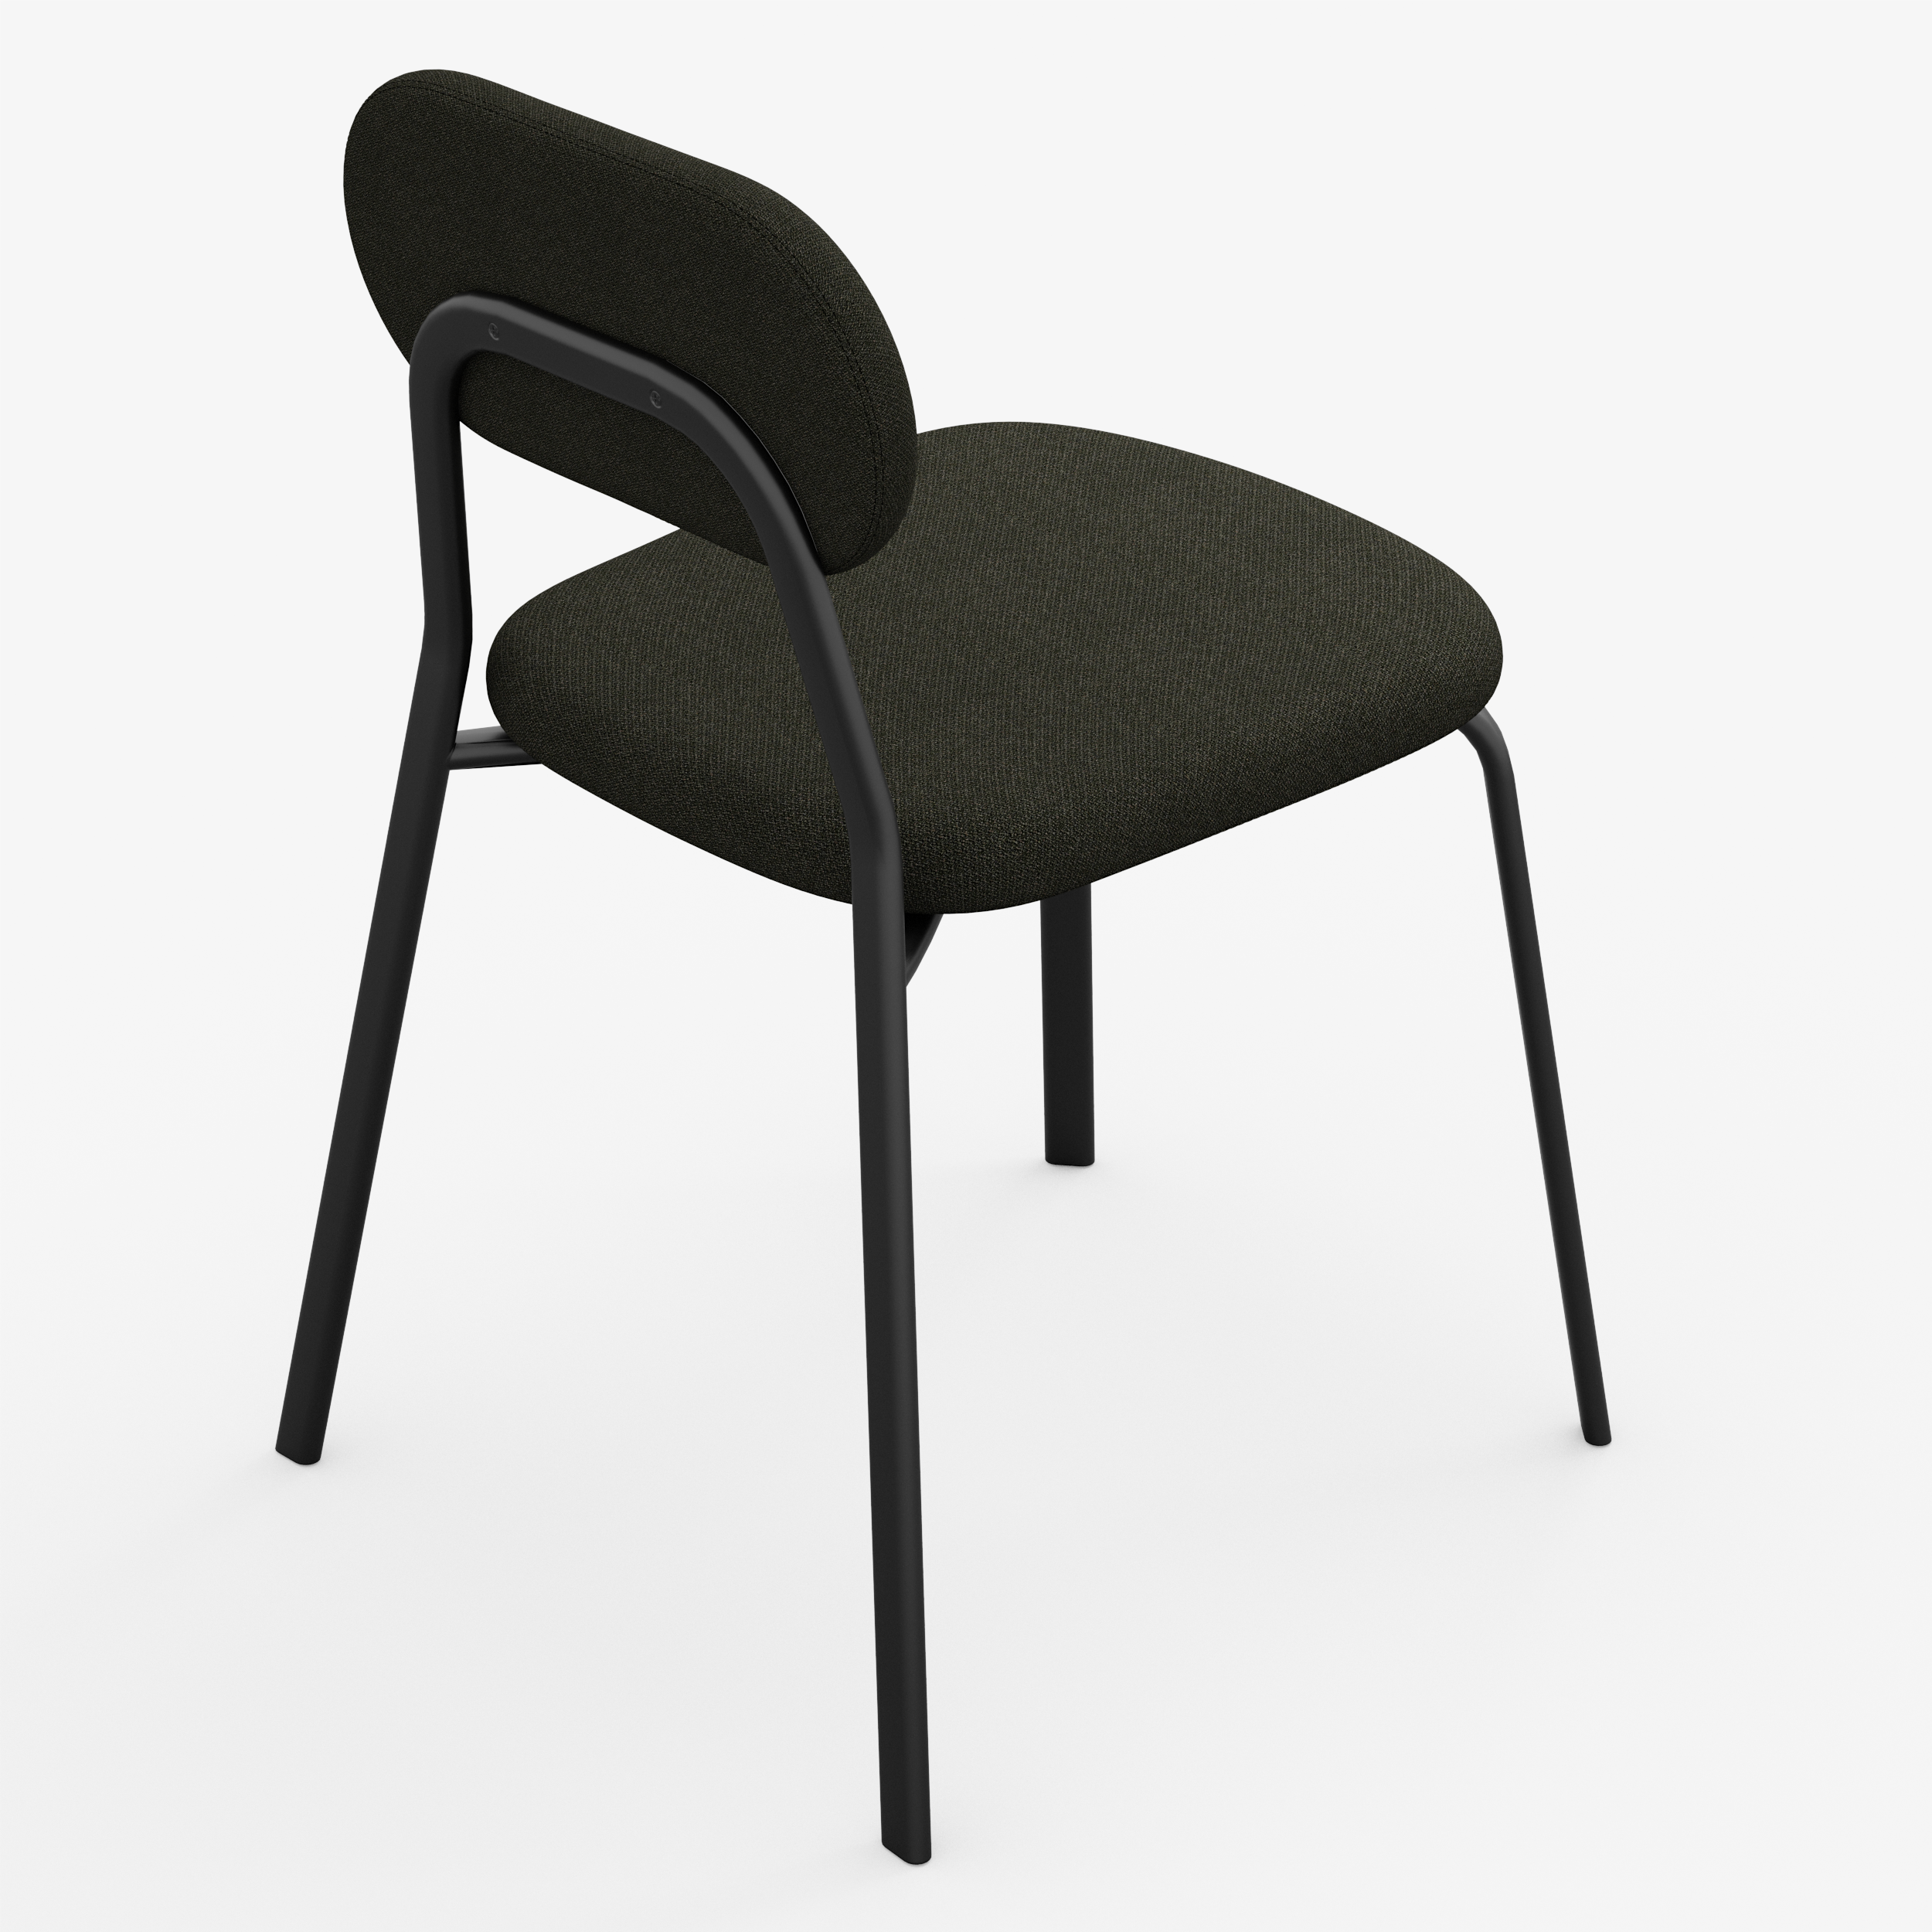 Form - Chair (Oval, Black)